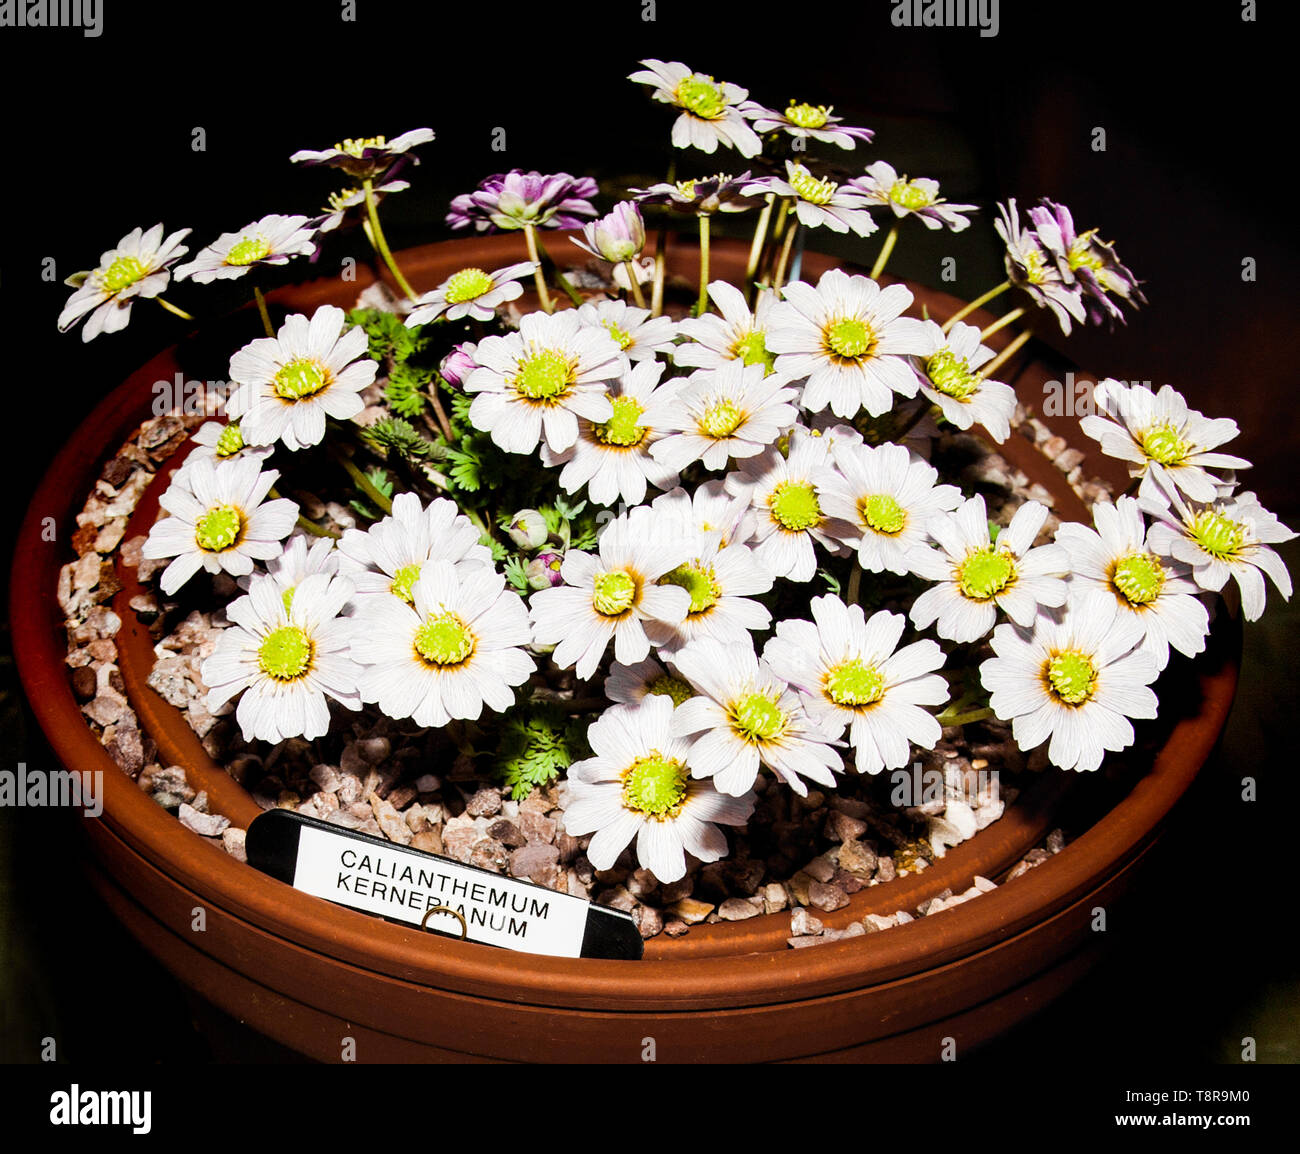 Callianthemum kernerianum  a hardy alpine plant suitable for rockeries grown as a container plant for show. Stock Photo